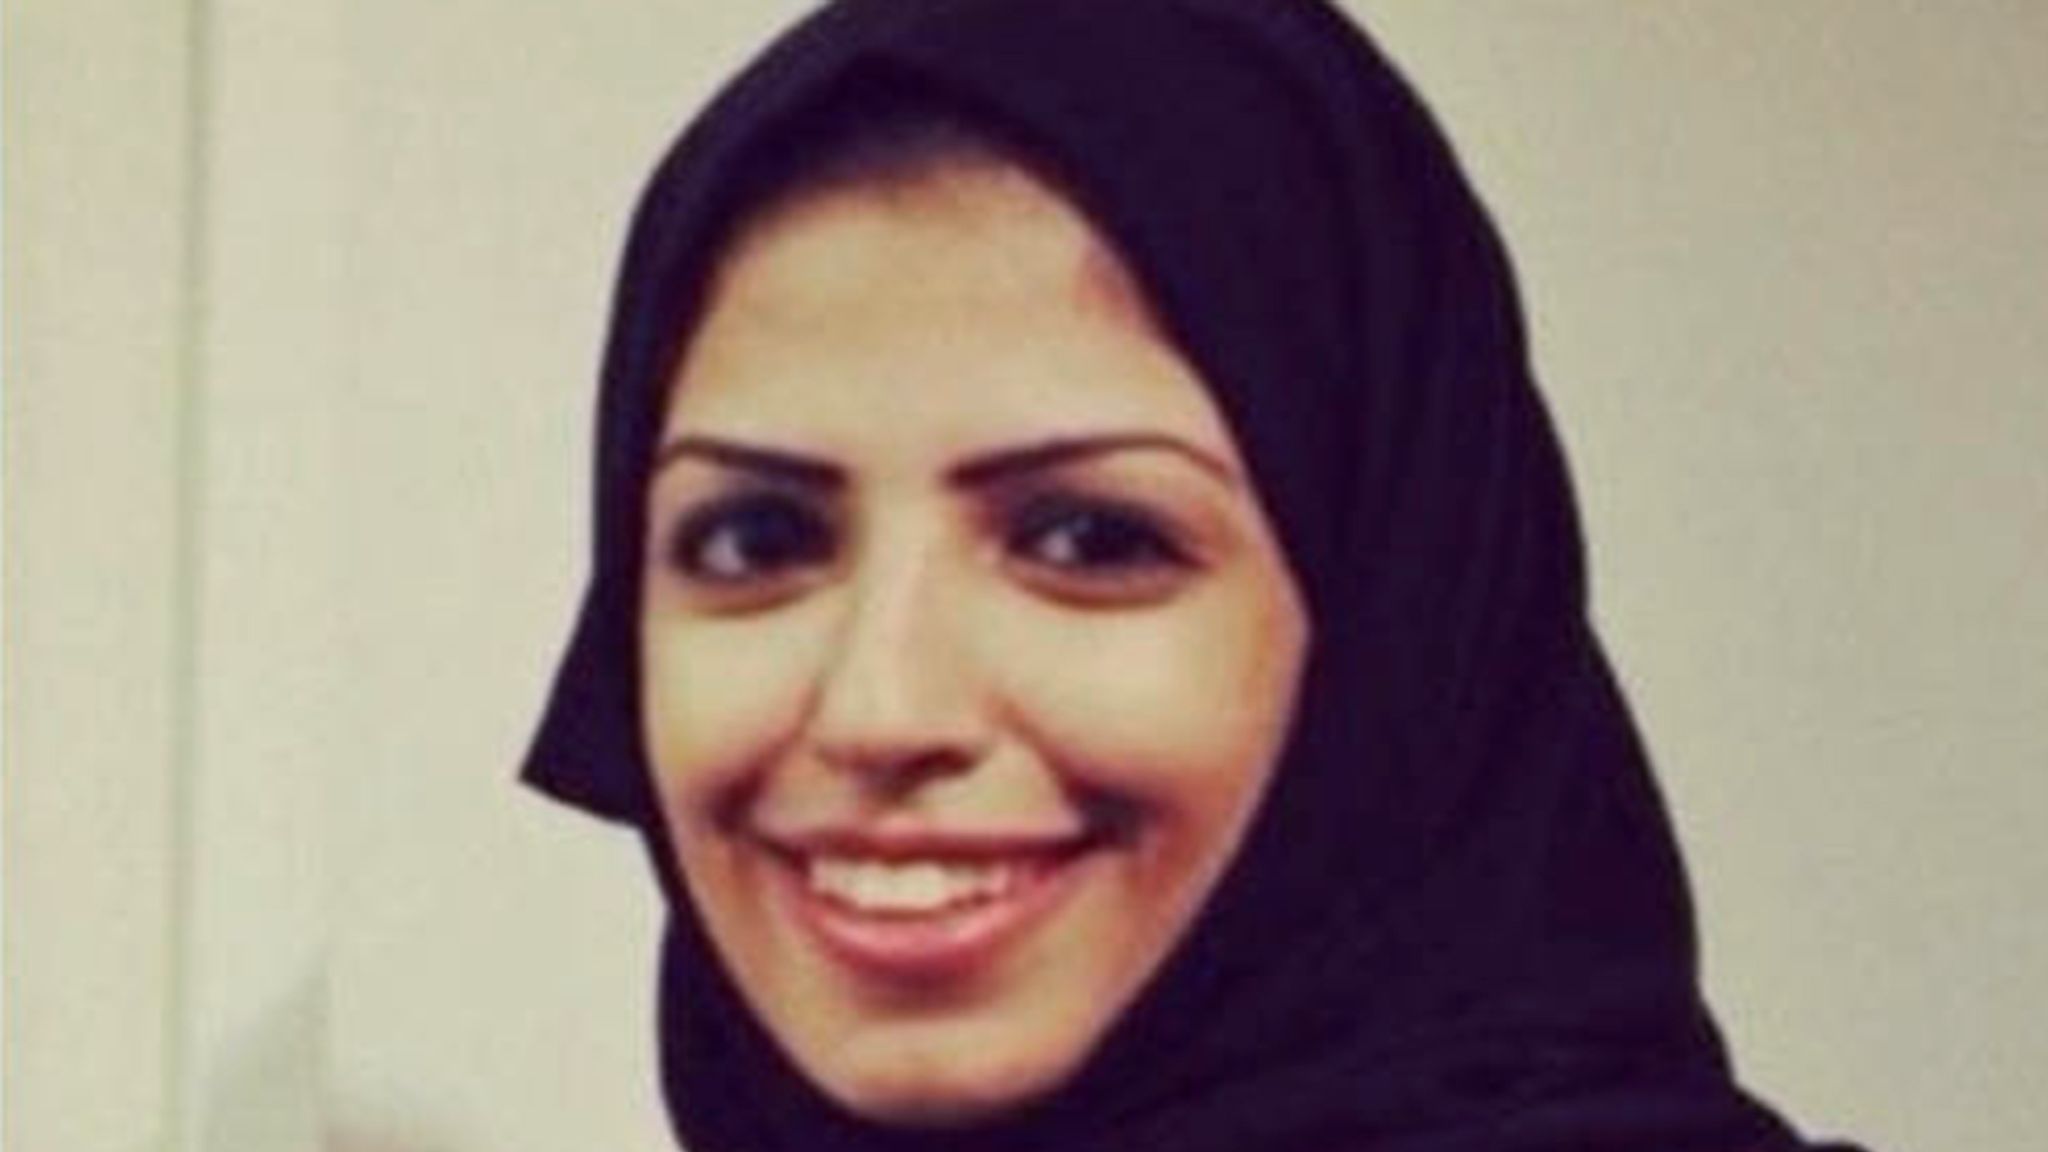 Salma al-Shehab: Leeds student jailed in Saudi Arabia is being used 'to set an example' and must be 'immediately released', says Amnesty International